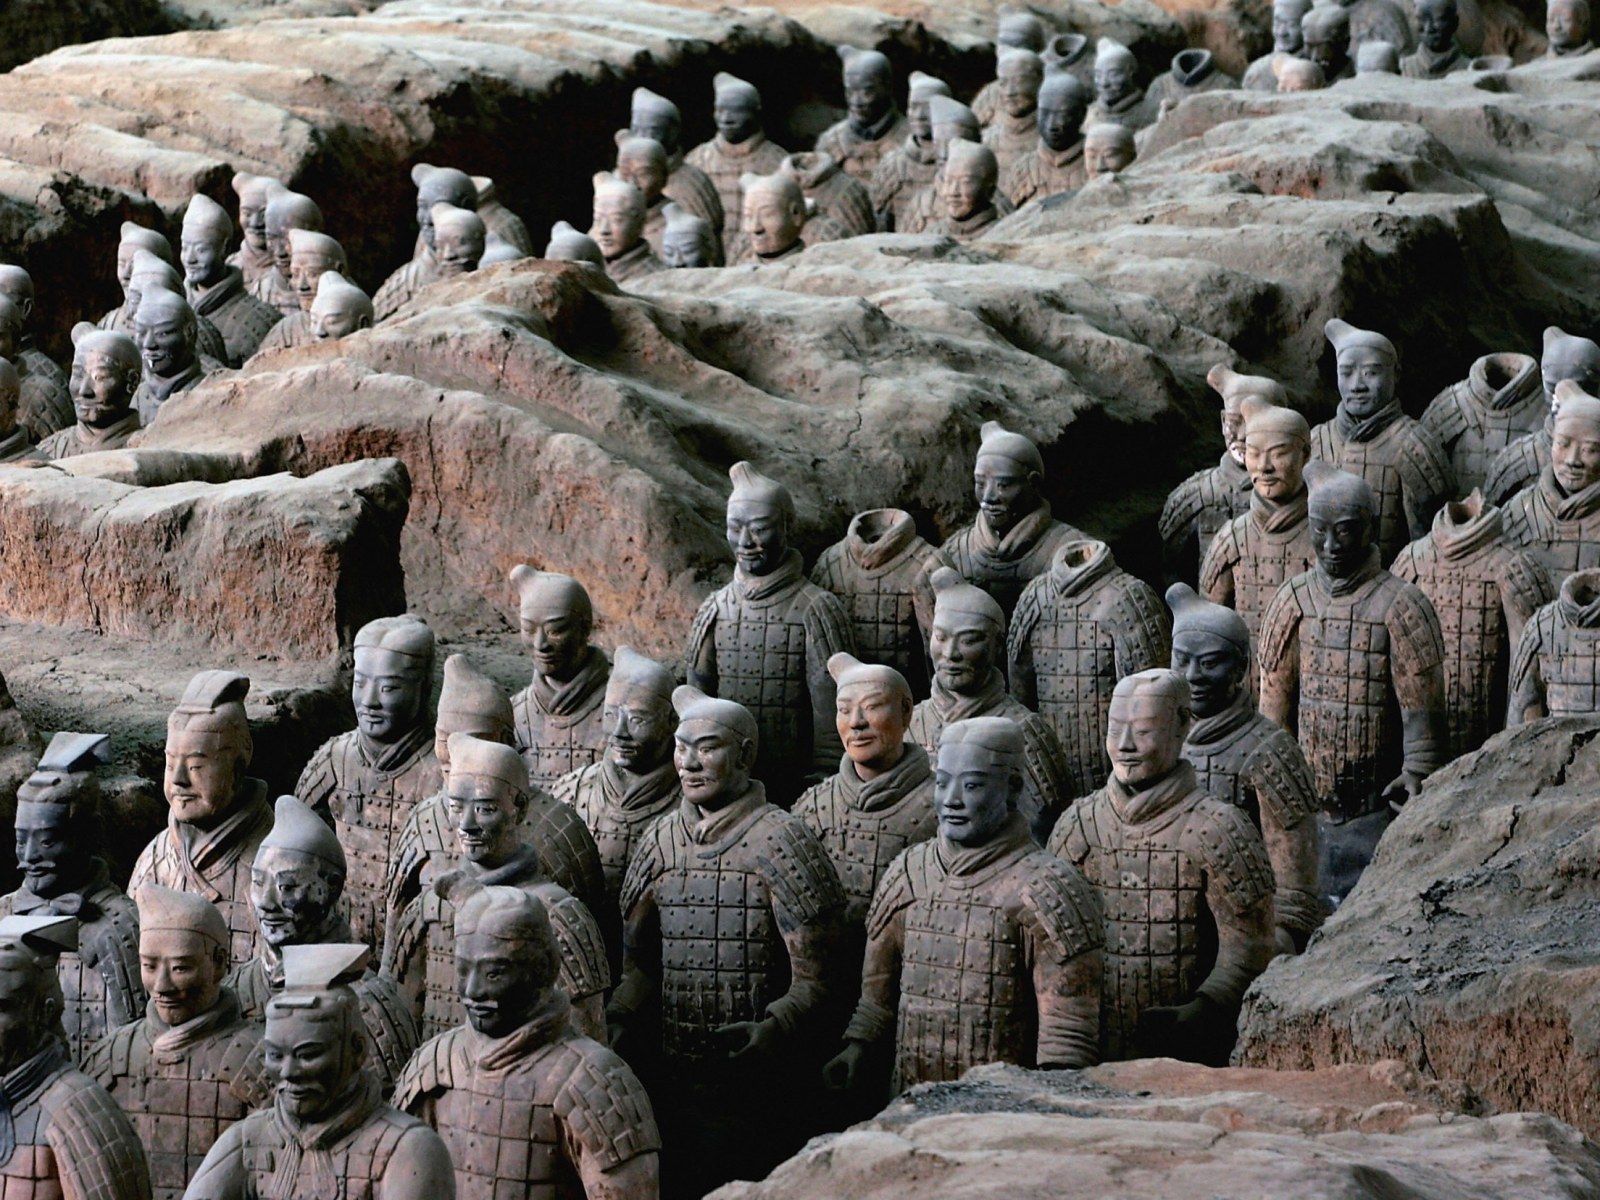 Hundreds More Terracotta Warriors Unearthed at Tomb of China's First Emperor